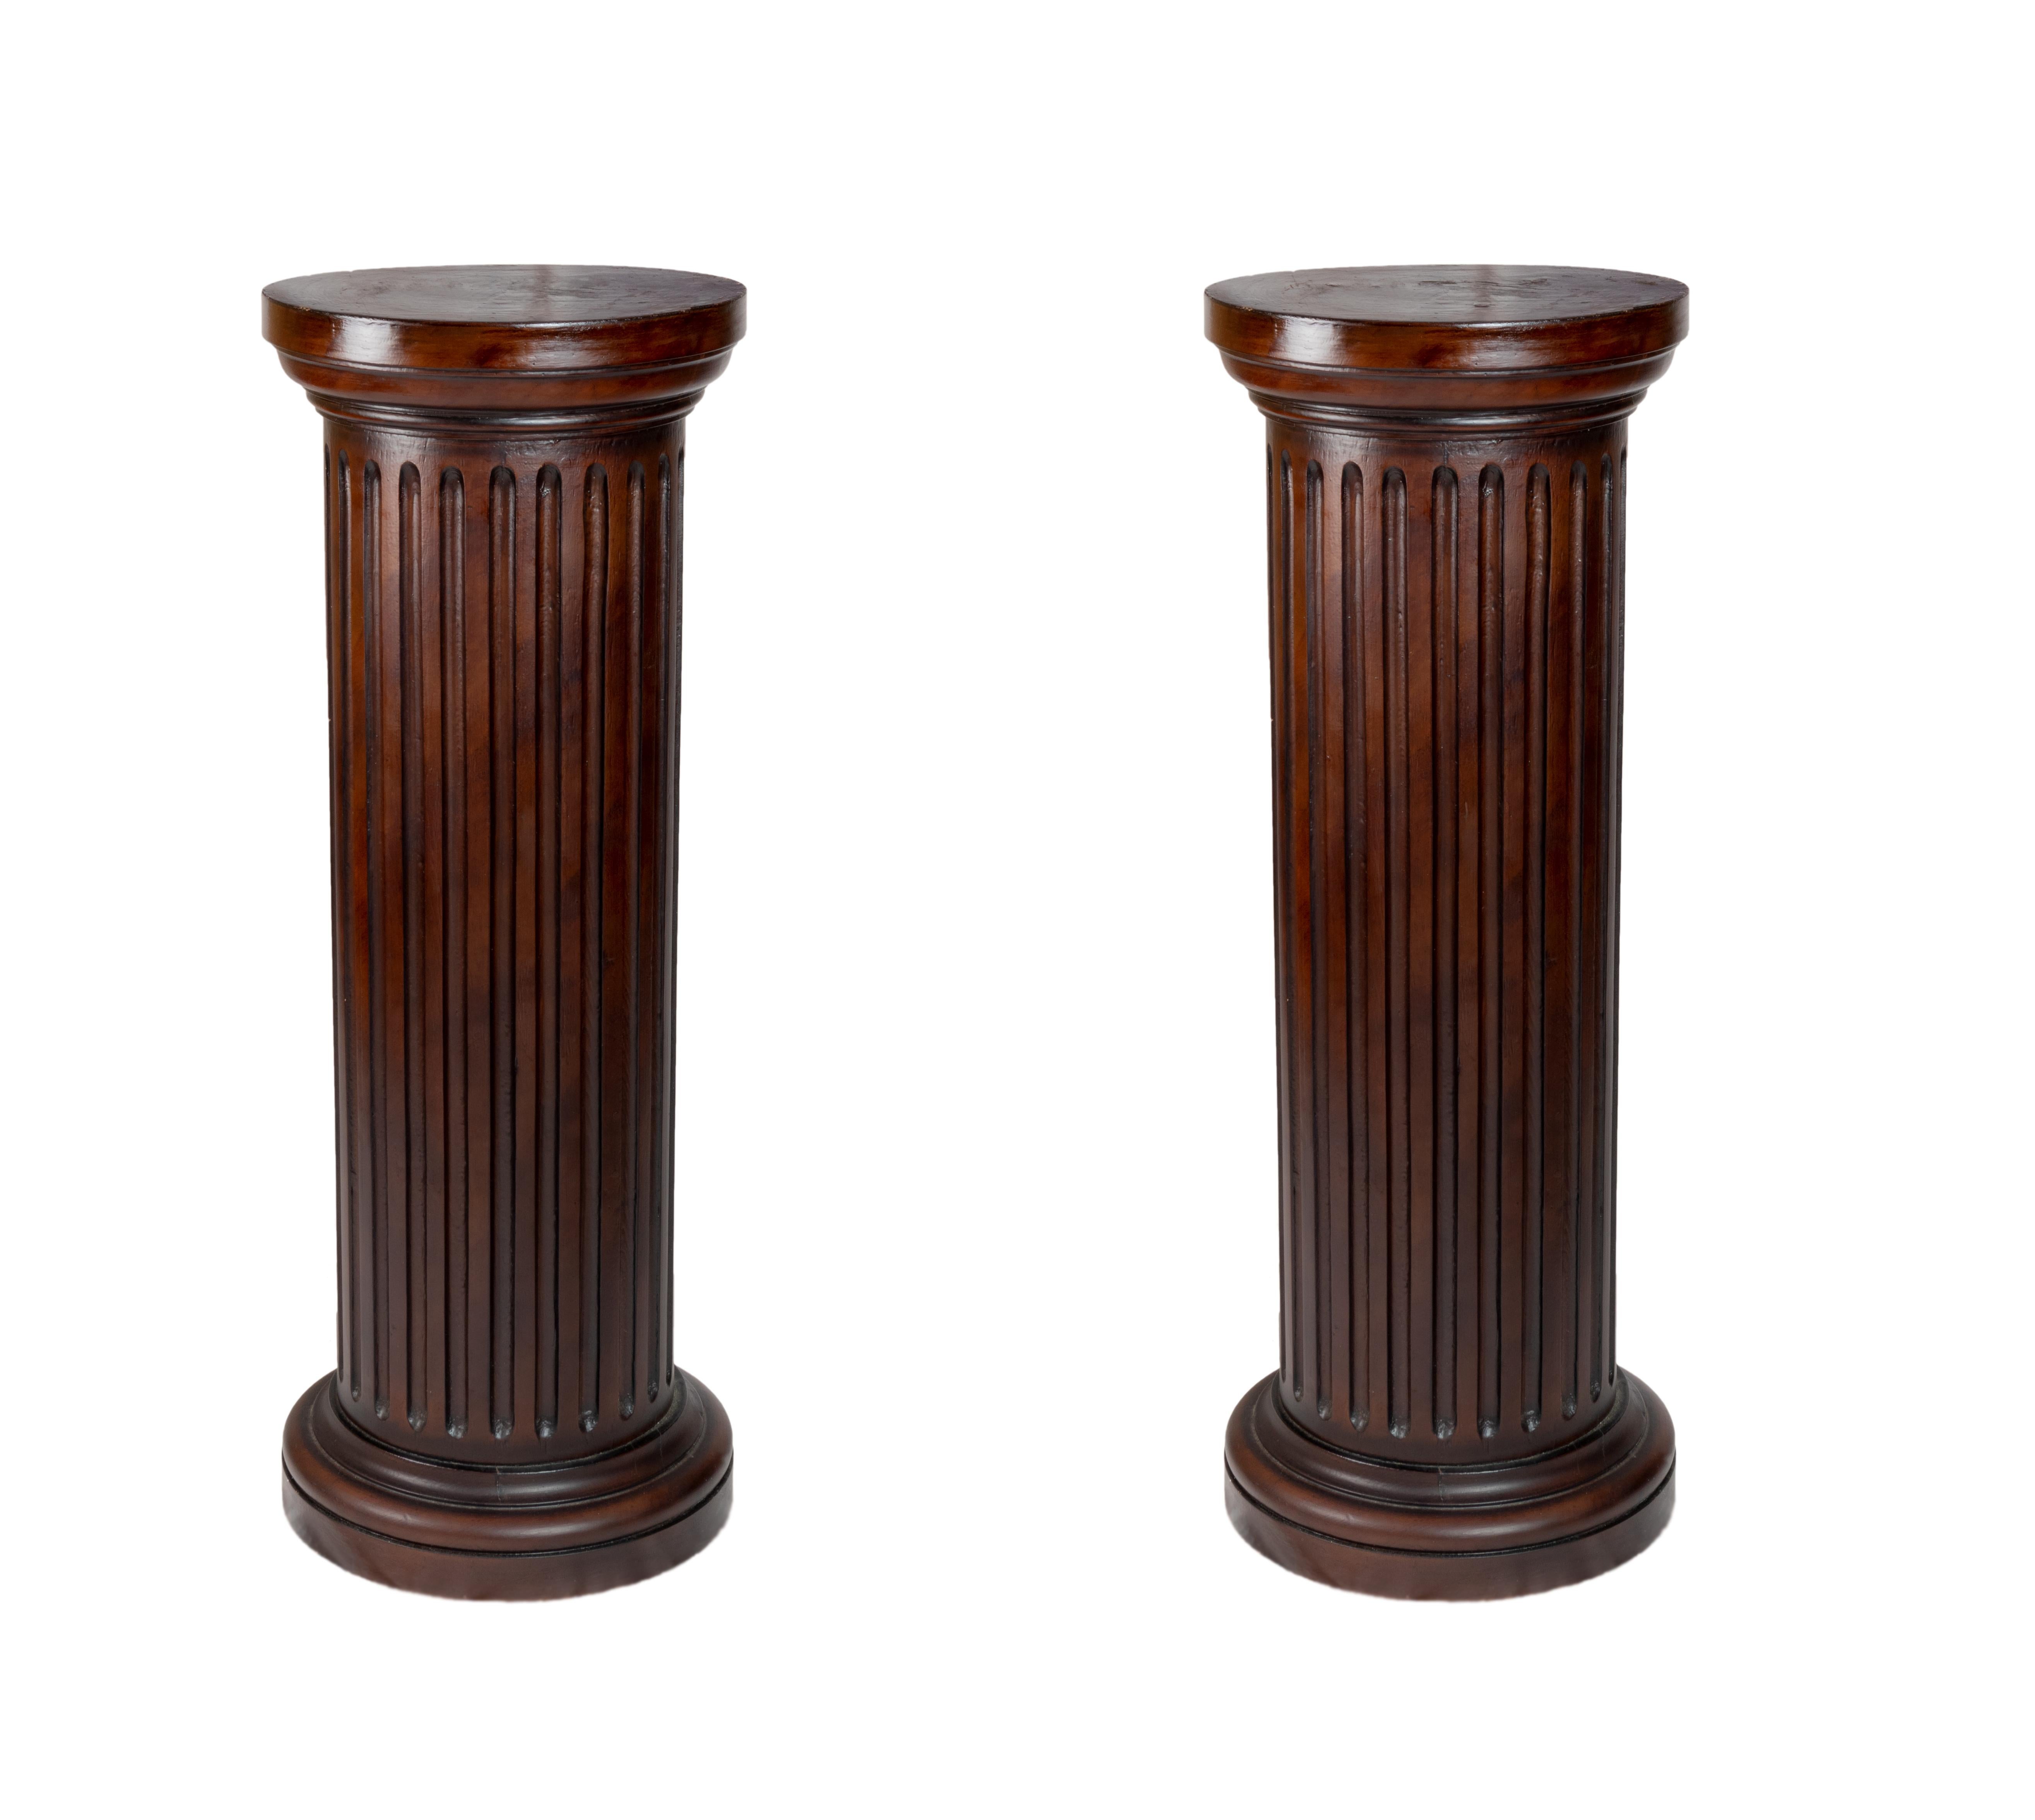  Pair Of French Fluted Wood Columns, 19th Century For Sale 1